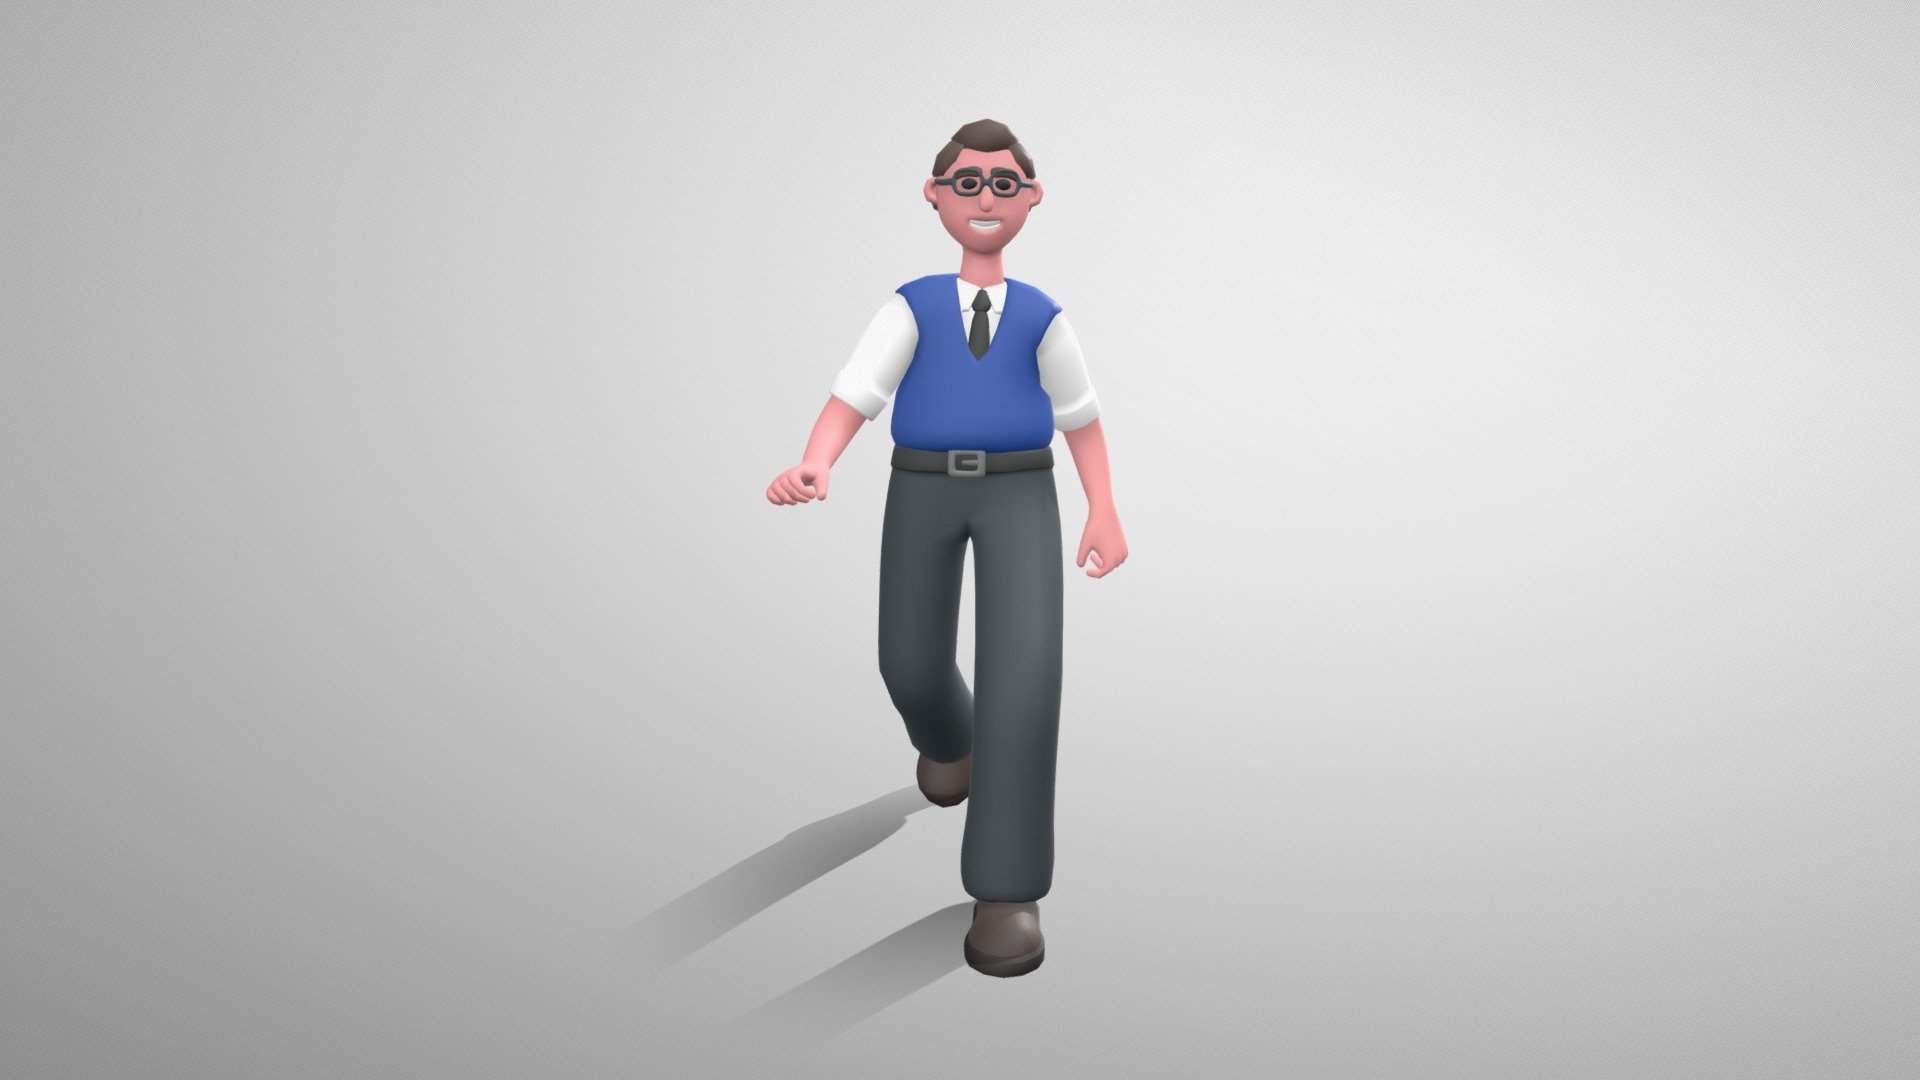 Stylized Man Teacher is the part of the big characters bundle. These stylized 3D characters might be useful for motion graphics design, cartoon production, game development, illustrations and many other industries.

The 3D model is rigged and ready to use with Mixamo. You can apply any Mixamo animation in one click . We also added 12 widely used animations.

The character model is well optimized and subdivision ready. You can choose any smoothing option you want, according to your project.

The model has only a single texture. It is useful for mobile game development and it's easy to change colors of clothes, skin etc.

If you have any questions or suggestions on improving our product, feel free to send a message to mail@dreamlab.net.ua - Stylized Man Teacher - Mixamo Rigged Character - Buy Royalty Free 3D model by Dream Lab (@dreamlabanim) 3d model